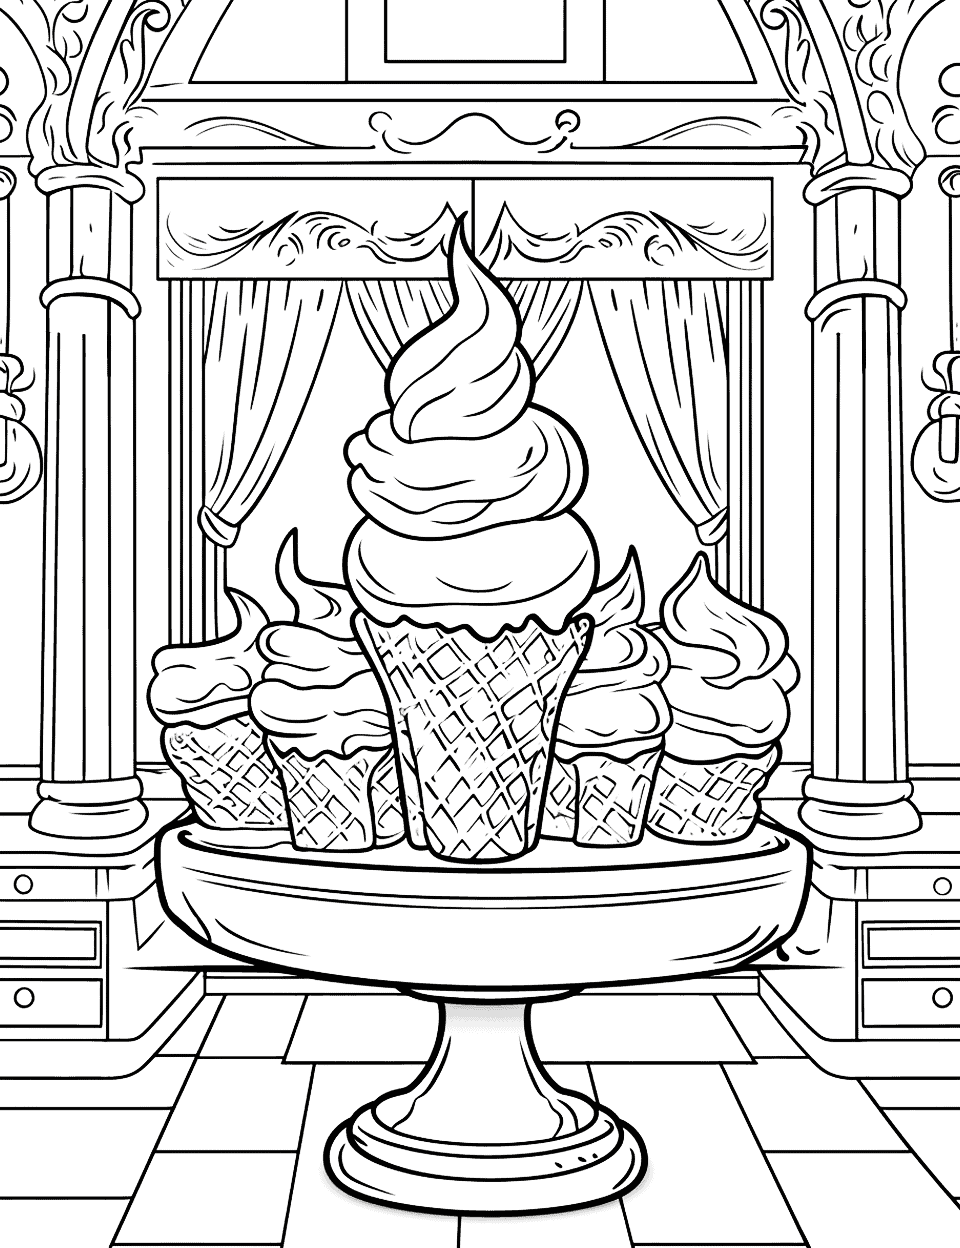 Detailed Ice Cream Parlor Coloring Page - A detailed scene inside an old-fashioned ice cream shop.